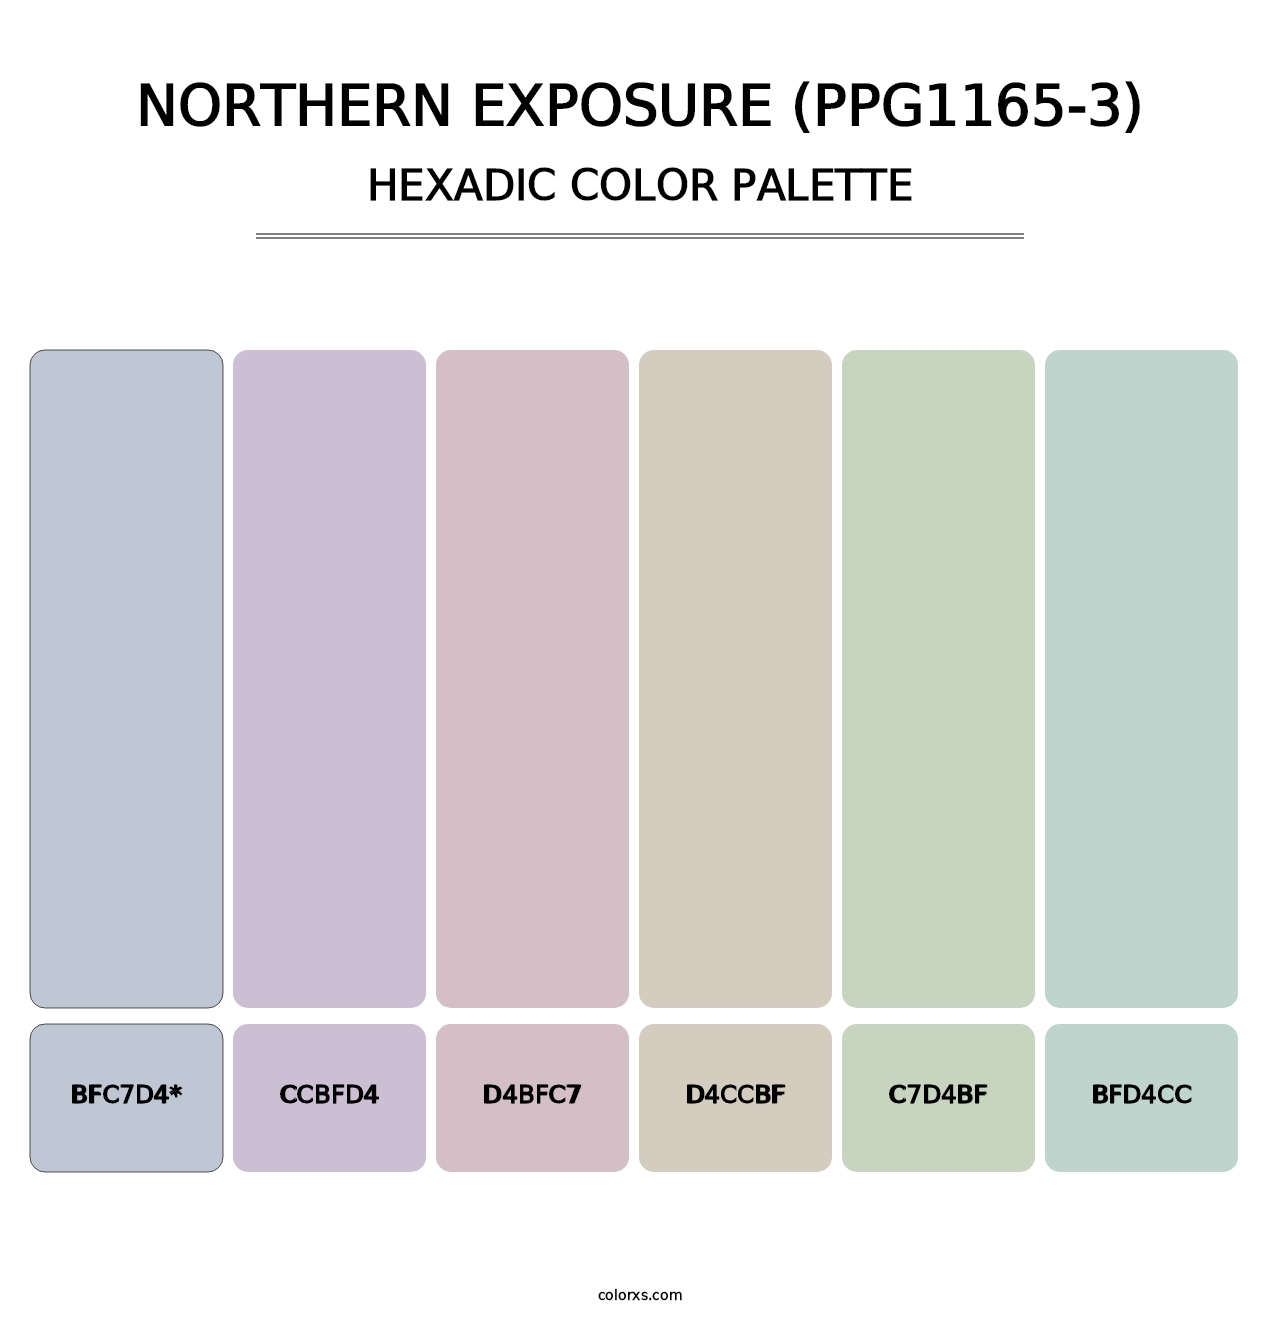 Northern Exposure (PPG1165-3) - Hexadic Color Palette